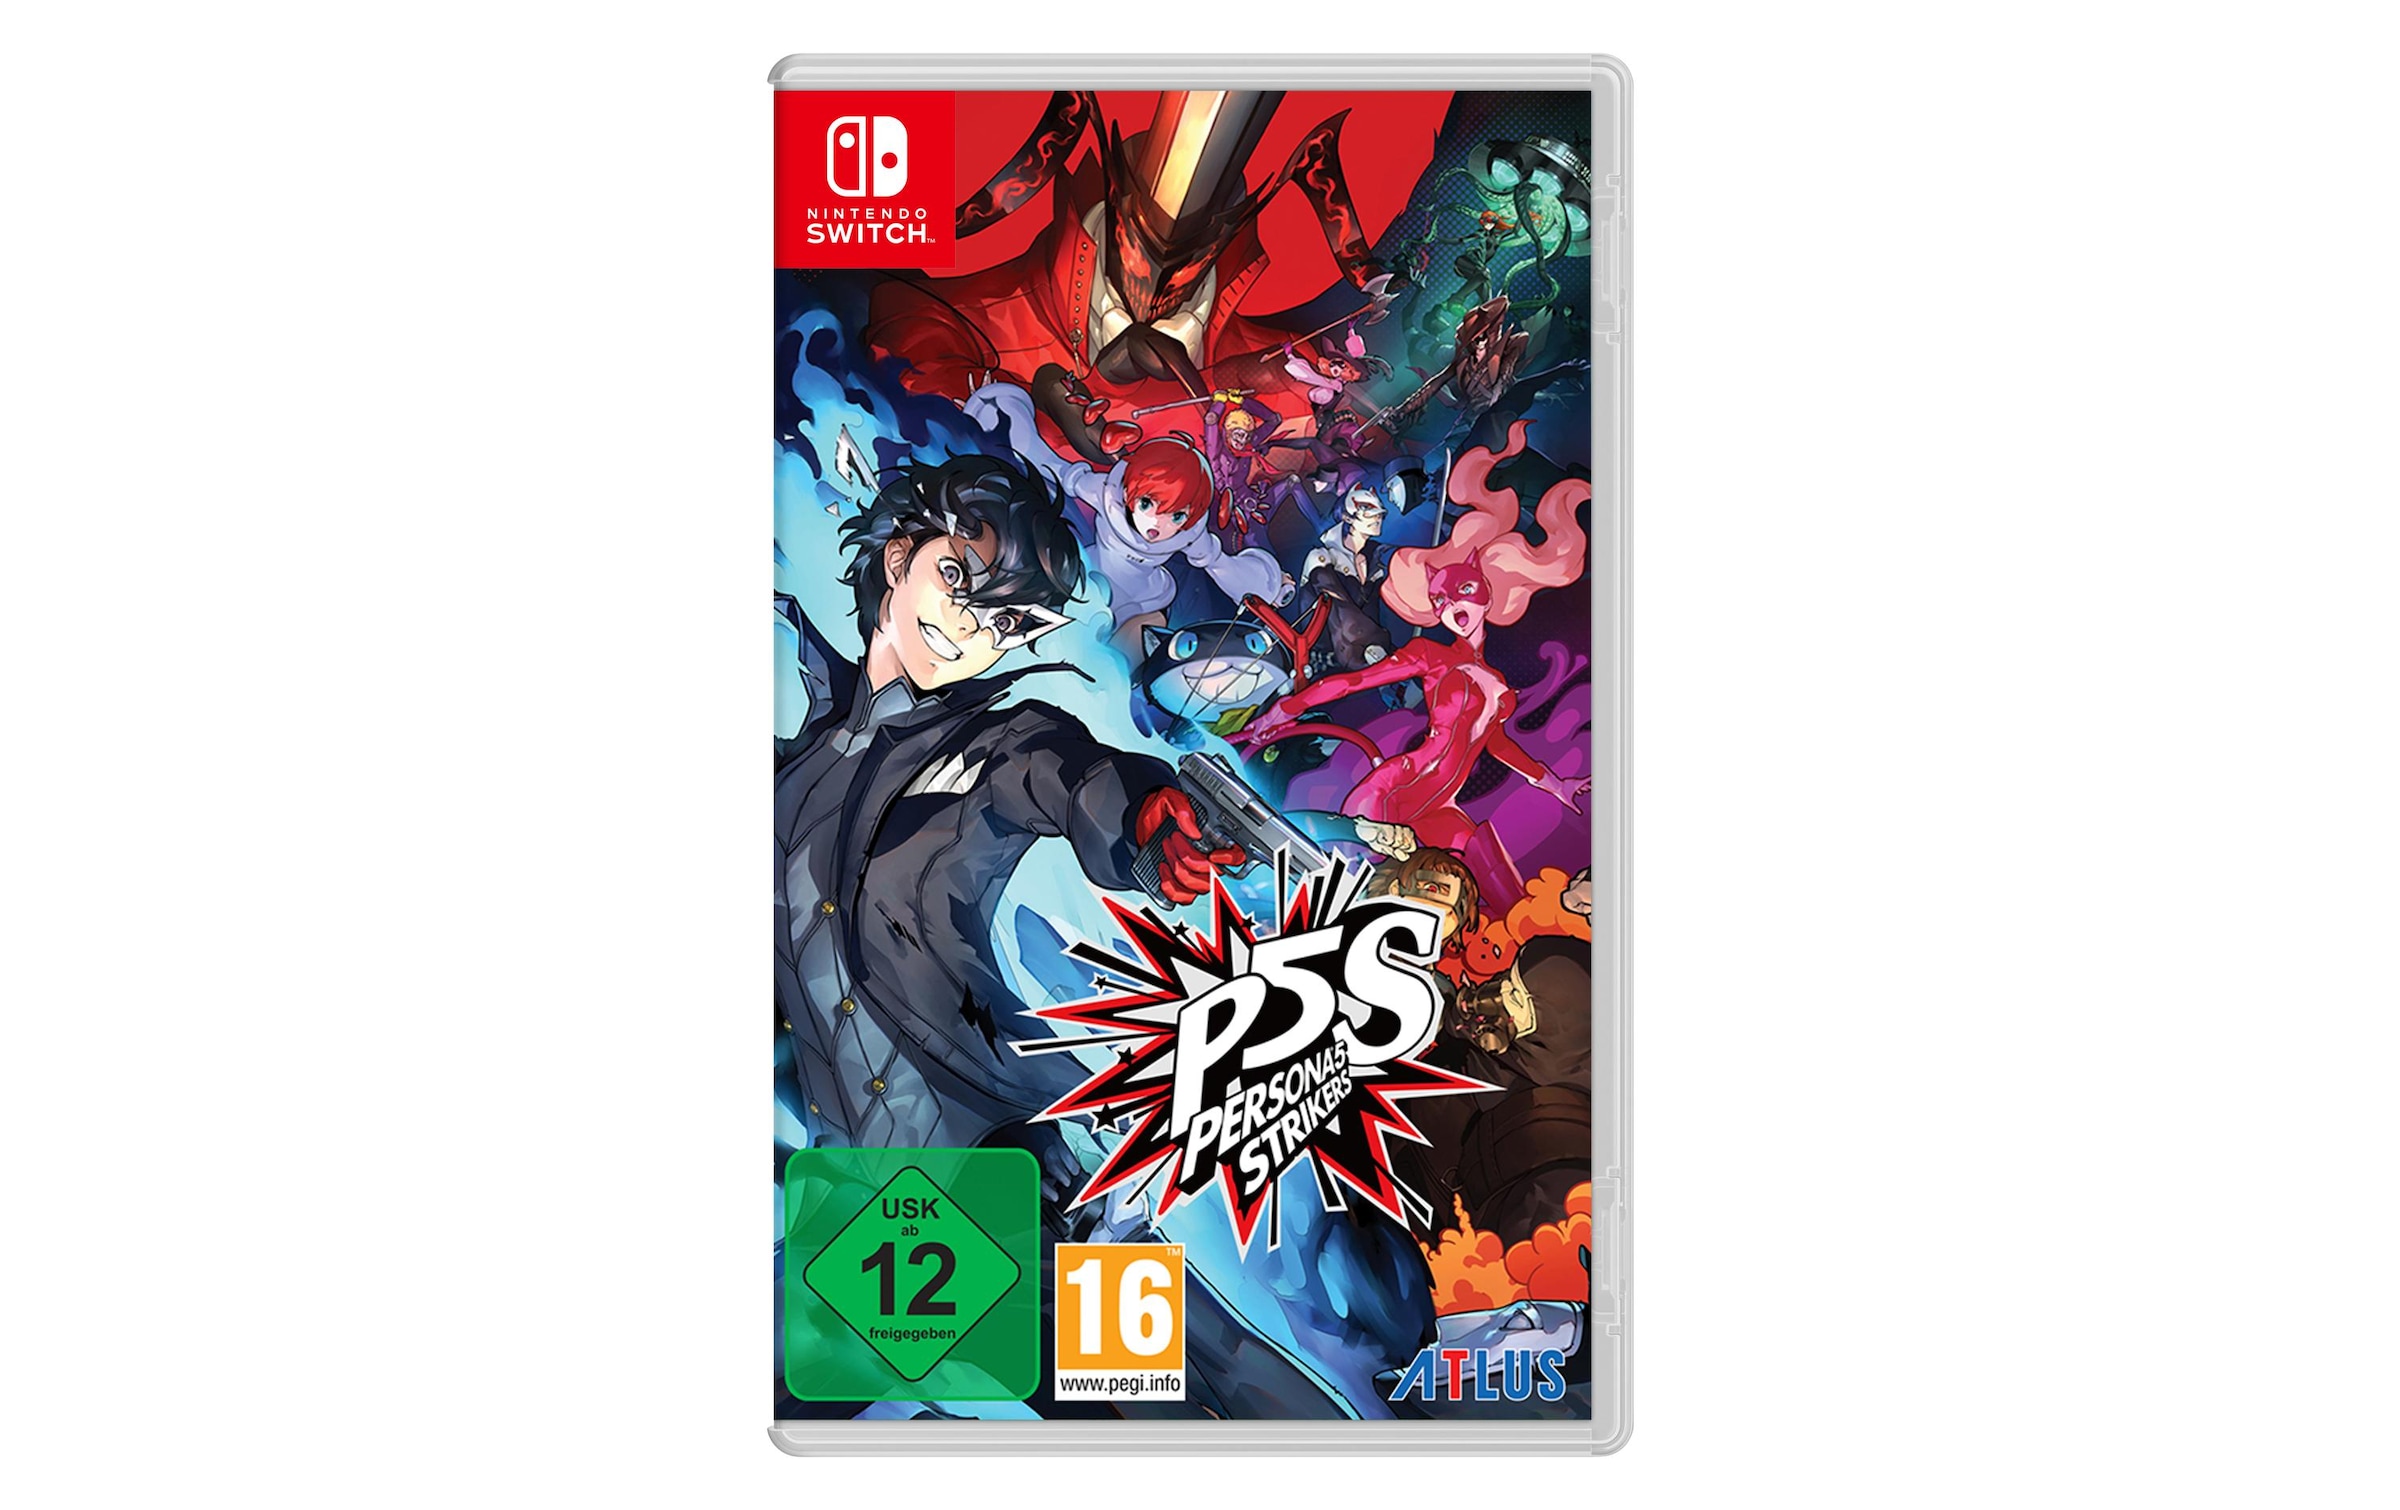 Spielesoftware »GAME Persona 5 Strikers Limited Edition«, Nintendo Switch